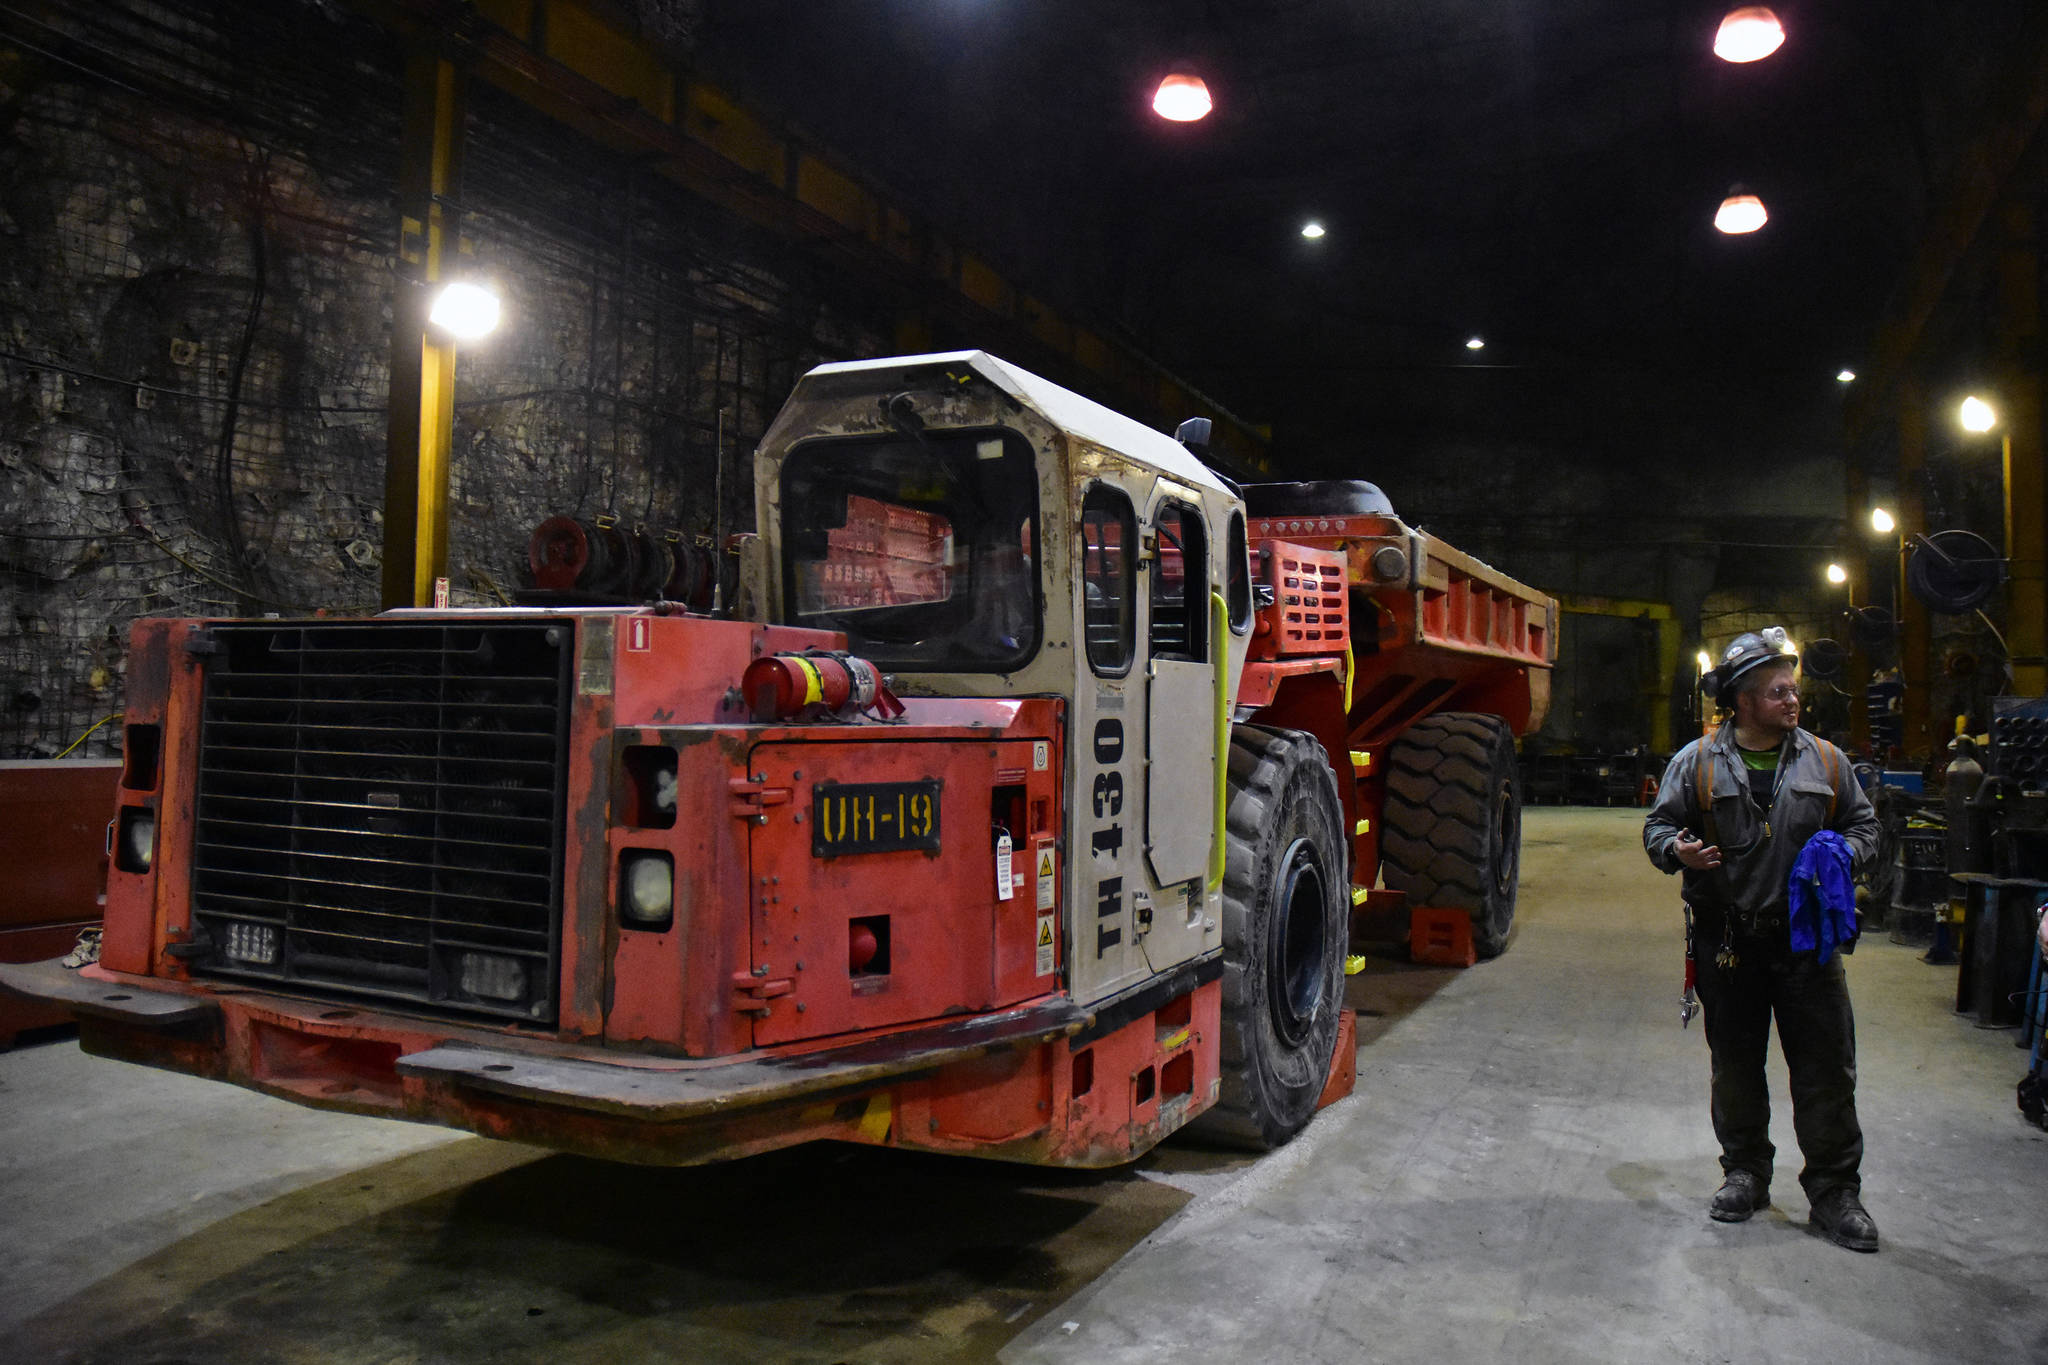 Mobile mechanic Jesse Vaughn talks about maintaining equipment at “The Shop,” an underground repair facility at the Kensington Gold Mine on Monday, Oct. 14, 2019. (Peter Segall | Juneau Empire)